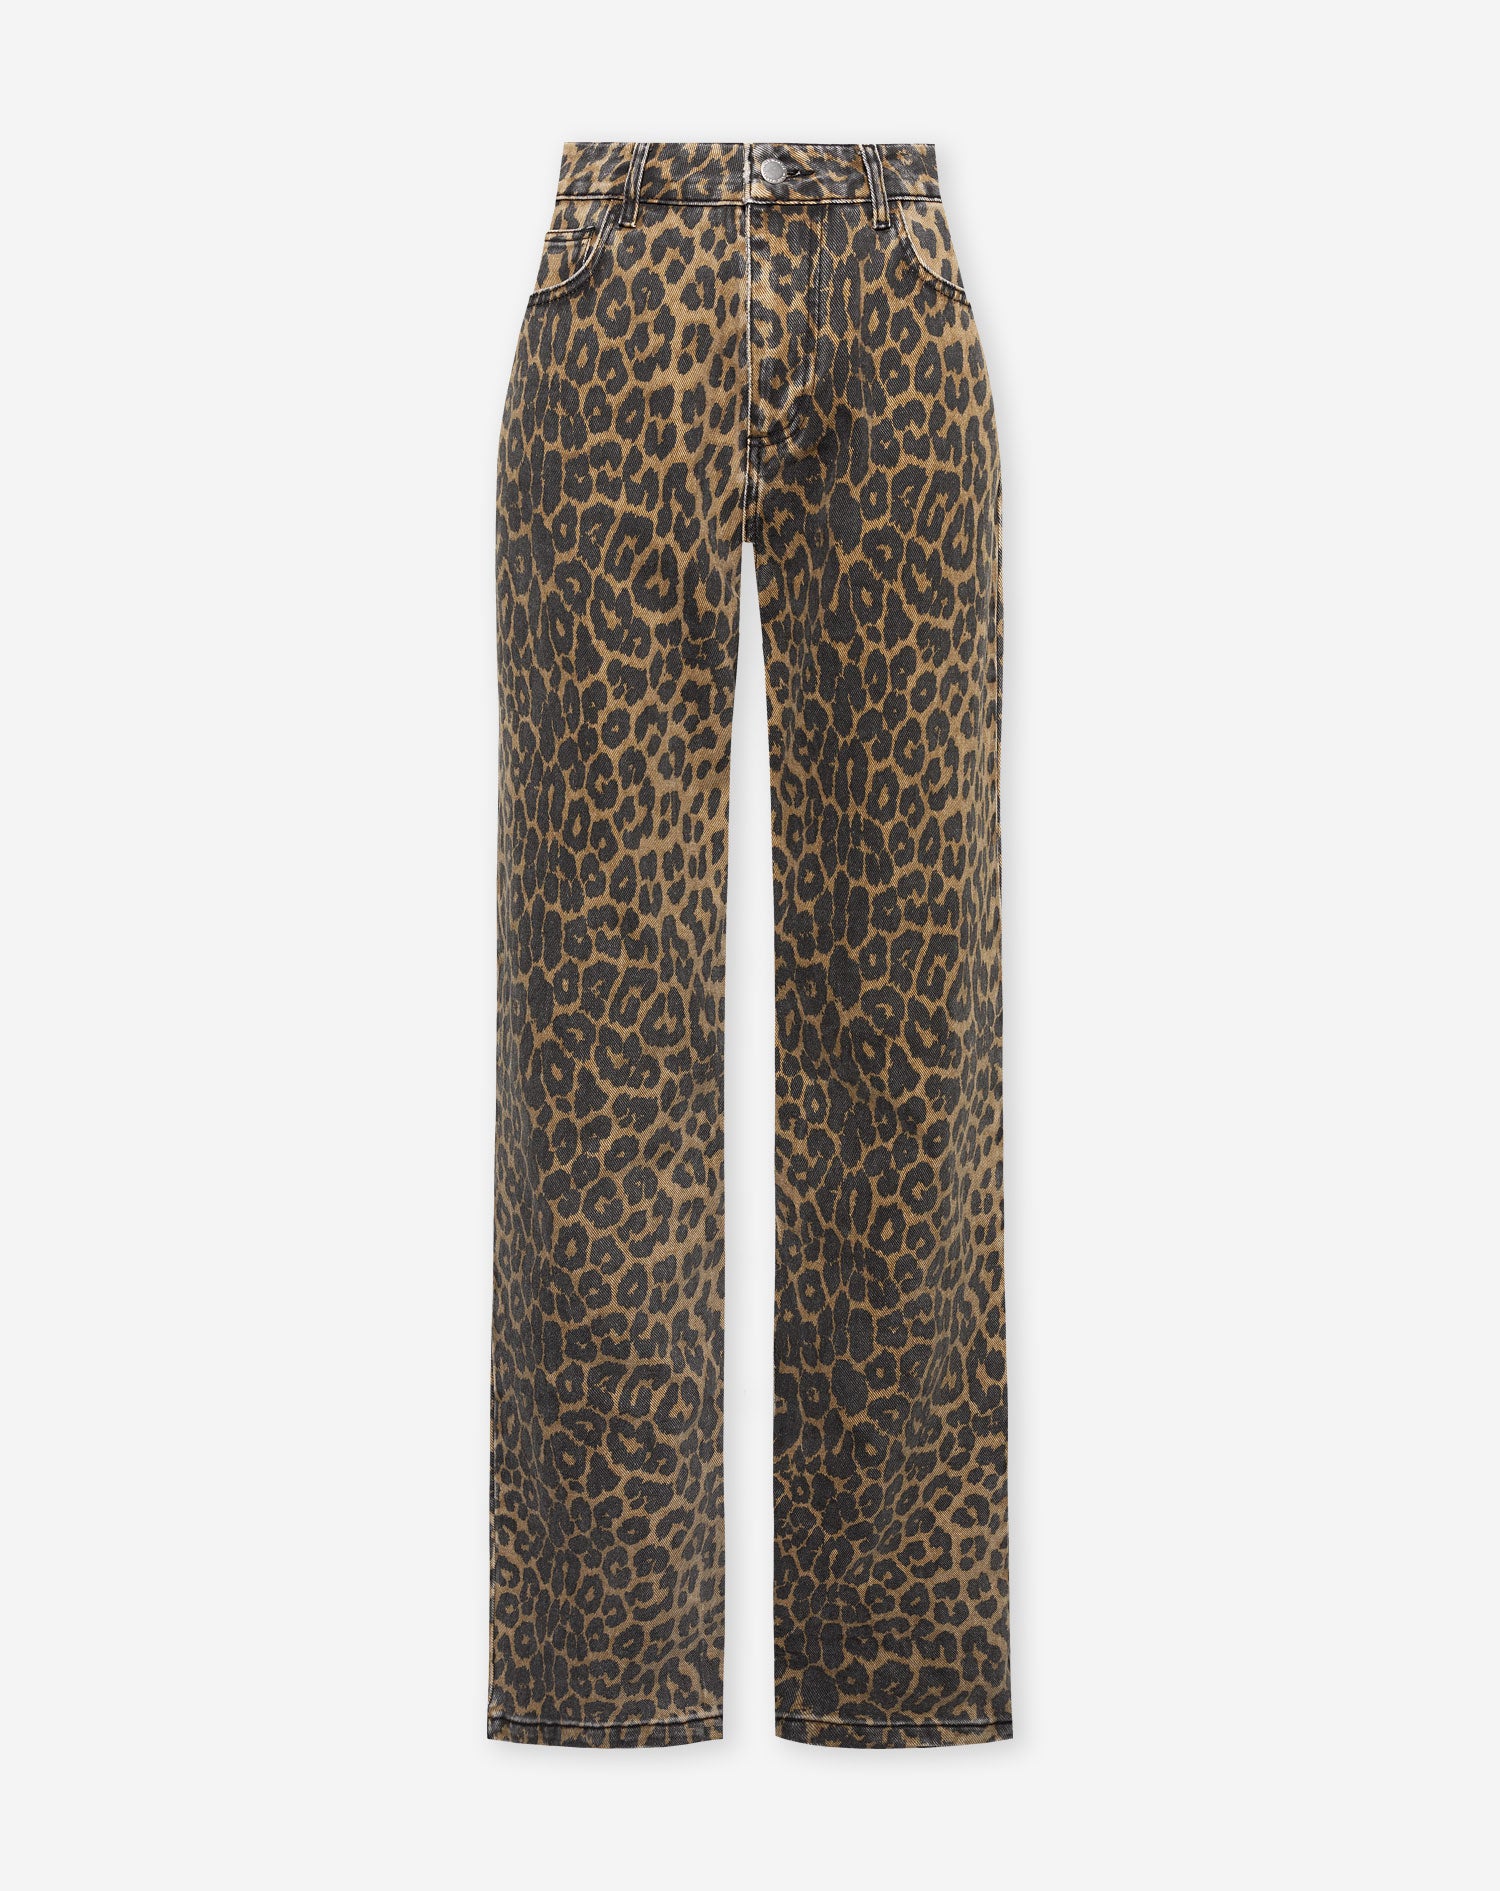 LEOPARD ALLOVER JEANS BLACK | Most Wanted